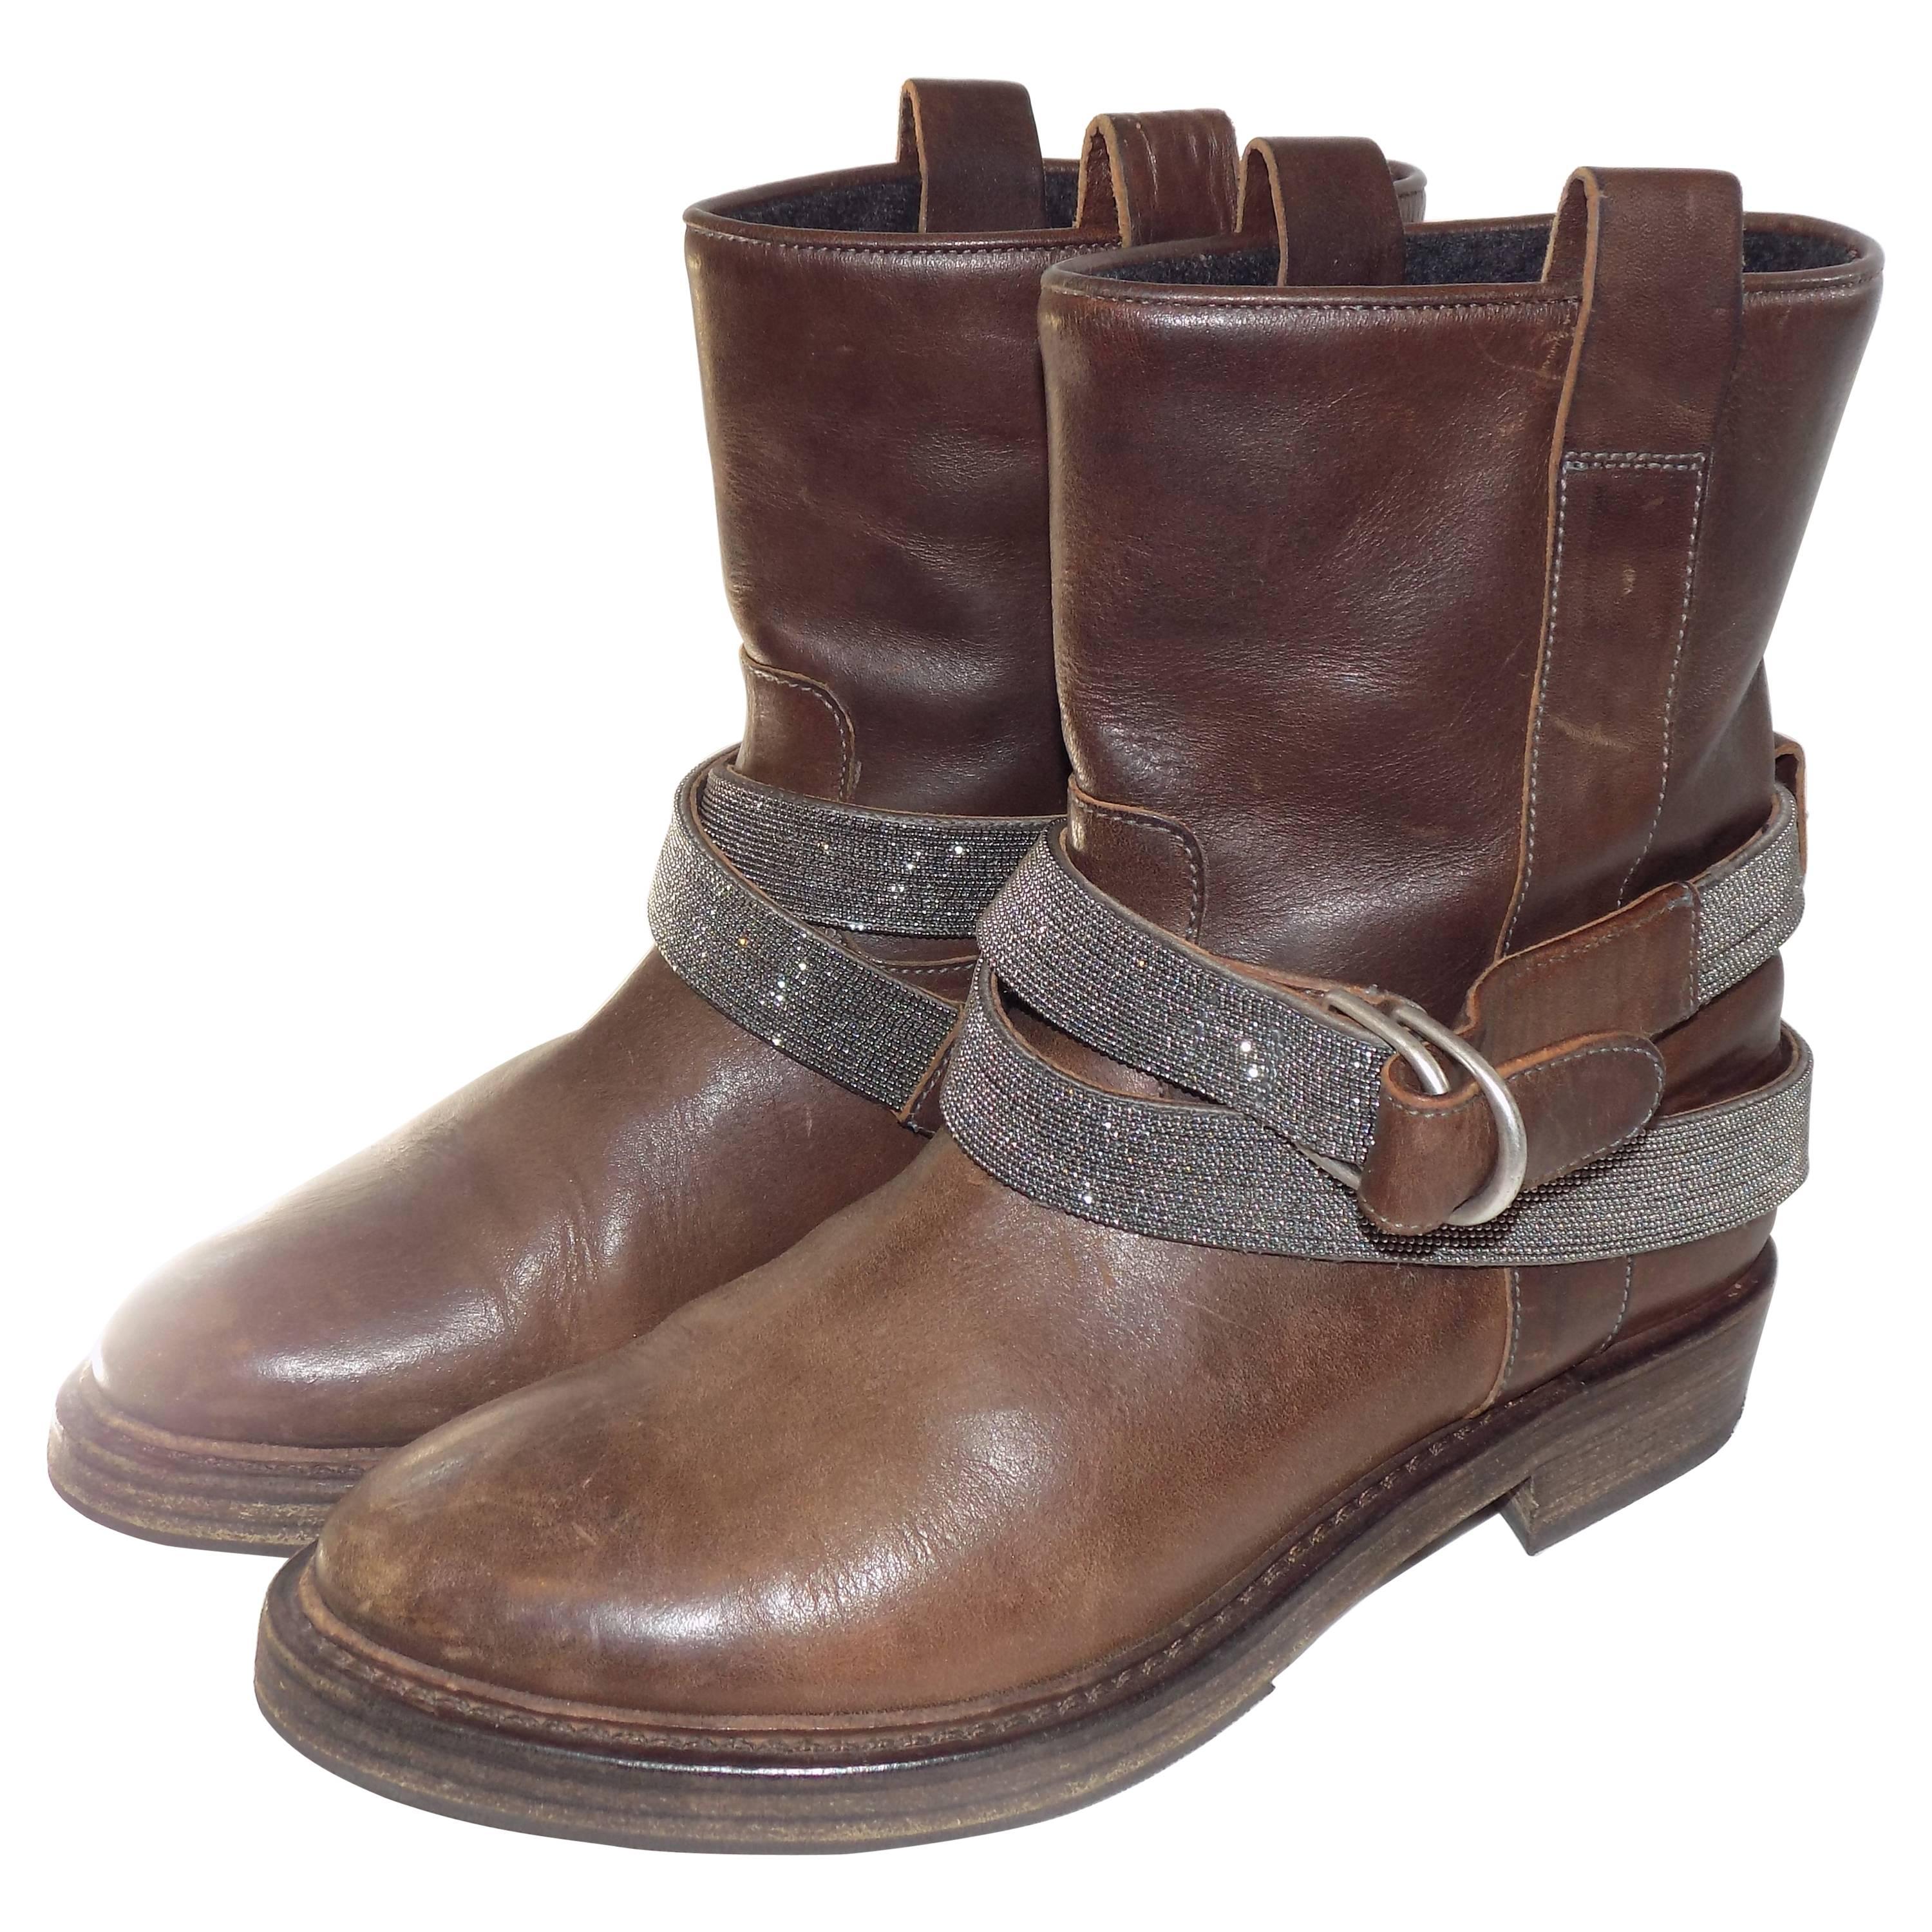 Brunello Cucinelli Leather Boots with Monili Strap Sold out Ret $1945